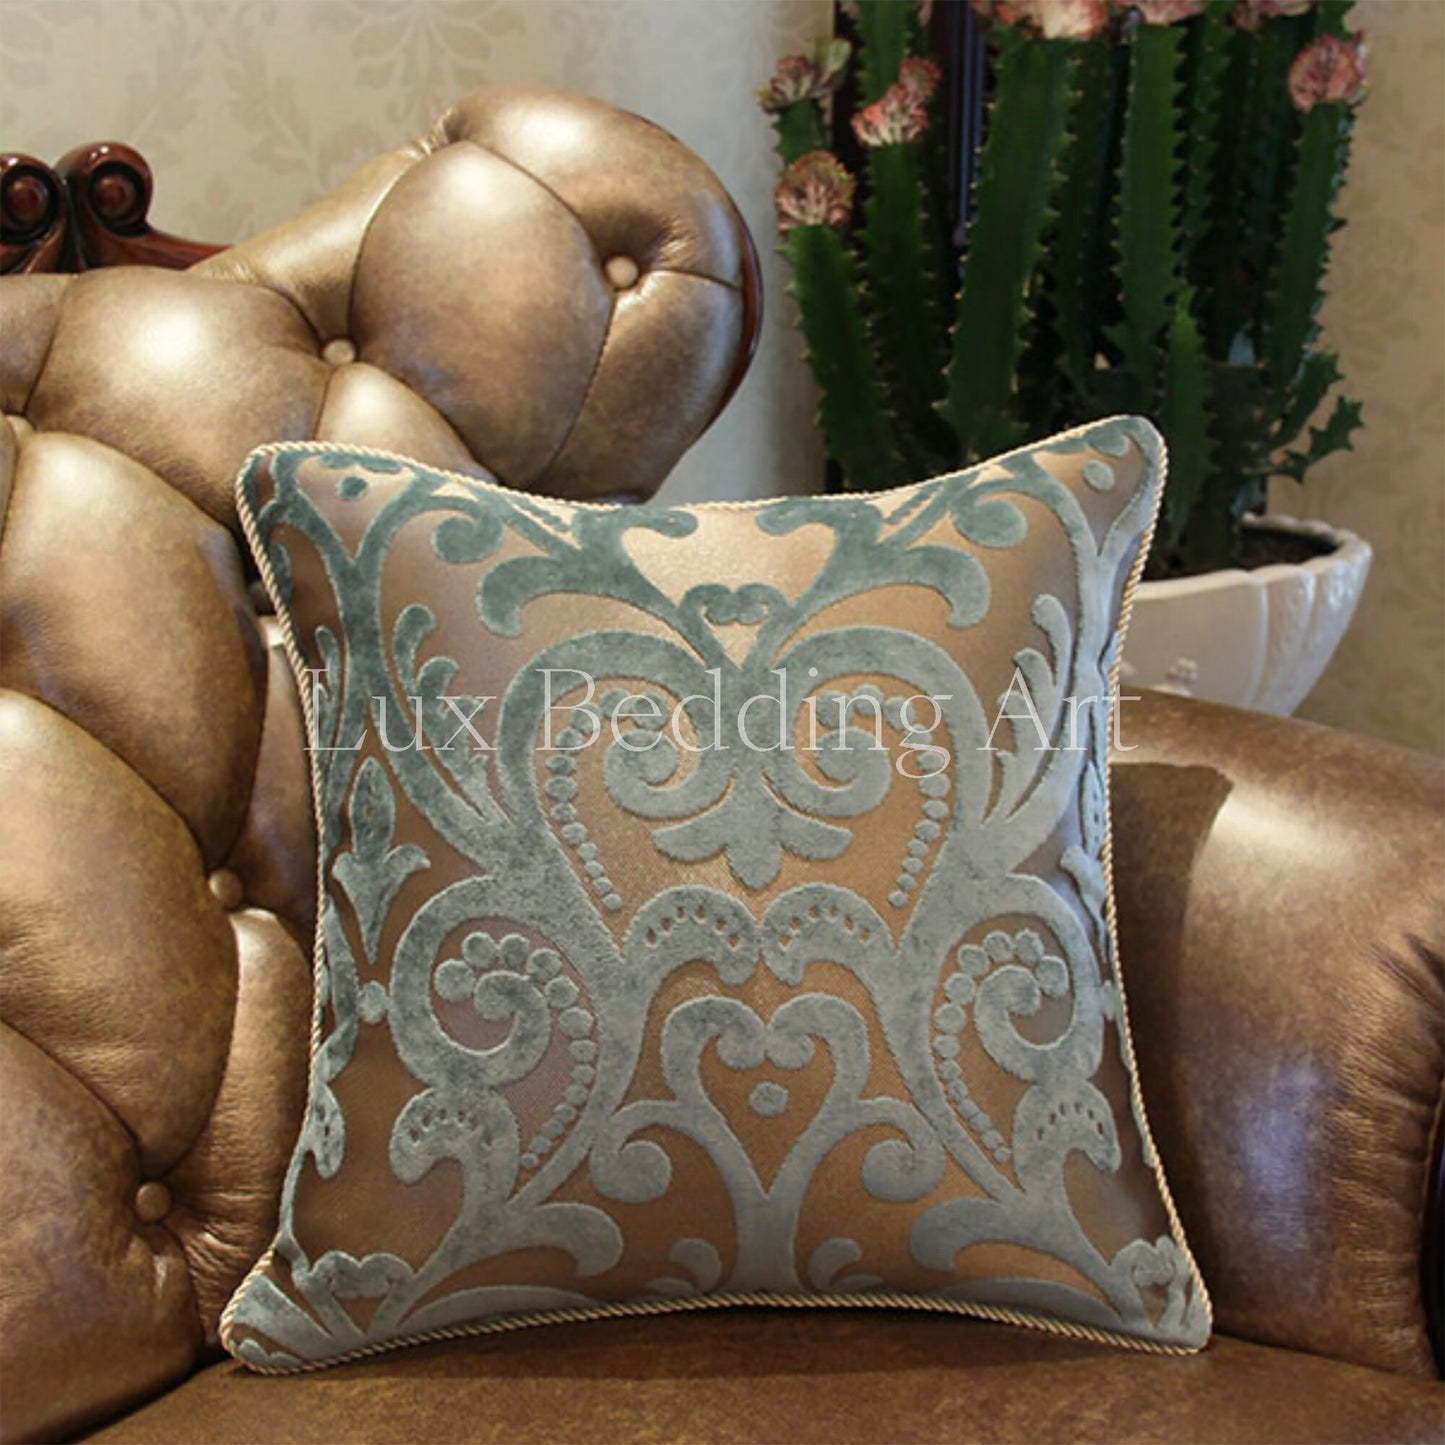 LUXURY Decorative Embroidery European design cushion cover pillow case • Polyester-Cotton Pillow cover • hight quality • 5 size